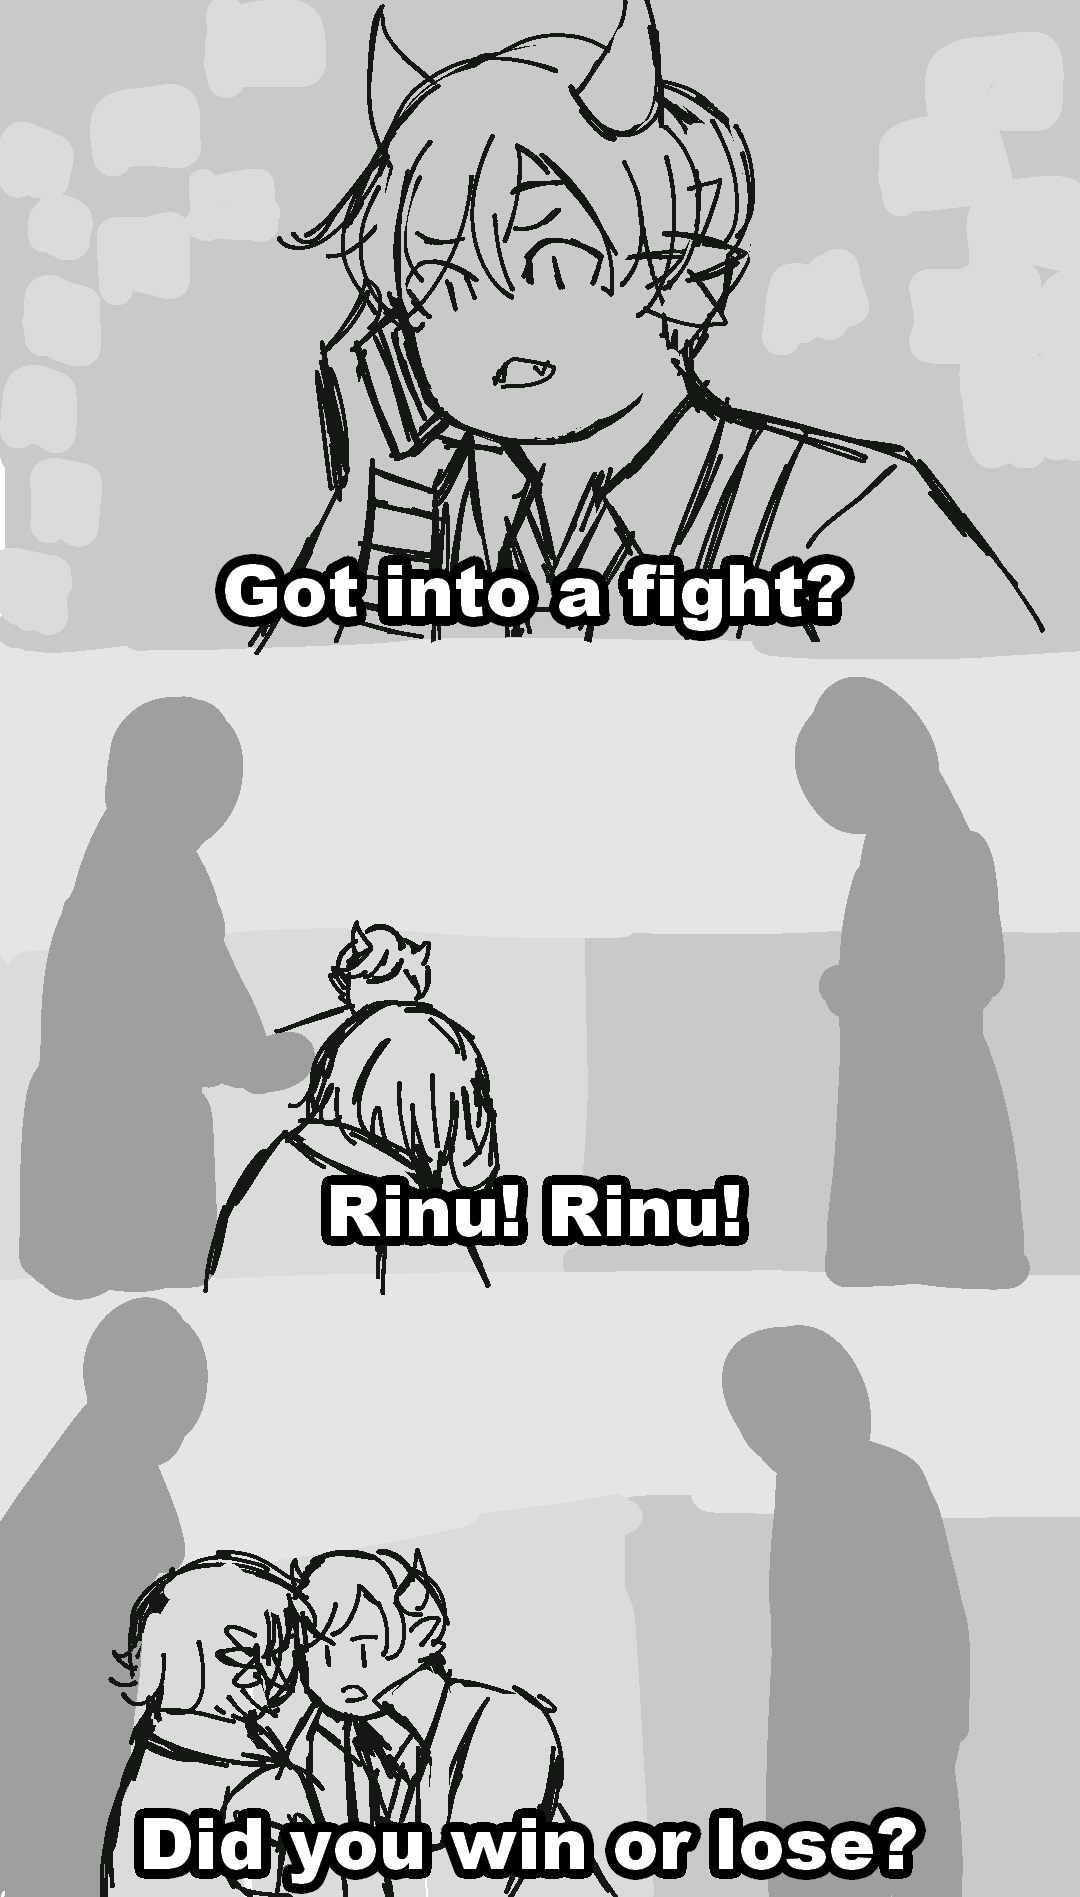 A redraw of the 'Did you win or lose' scene from Two Fathers in comic form. In the first panel, Ruriko is answering a phone with the subtitle 'Got into a fight?' The second panel has her running into a school with Rinu sitting with school staff with the subtitle 'Rinu! Rinu'. The final panel, Ruriko is kneeling in front of Rinu with her hands on his shoulders. The subtitles read 'Did you win or lose?'